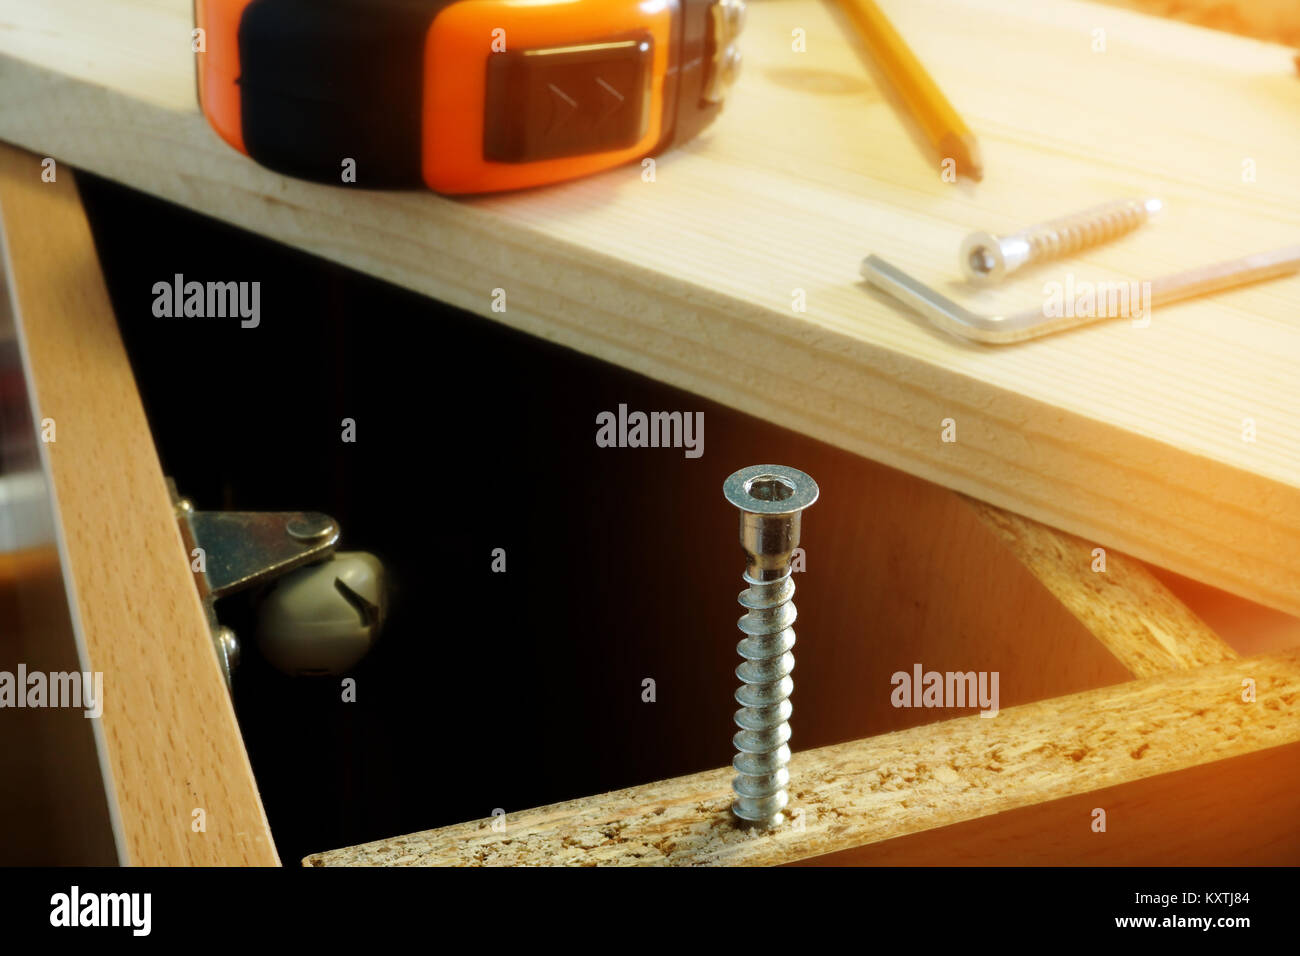 Furniture assembling. Parts of cabinet and screw close up. Stock Photo